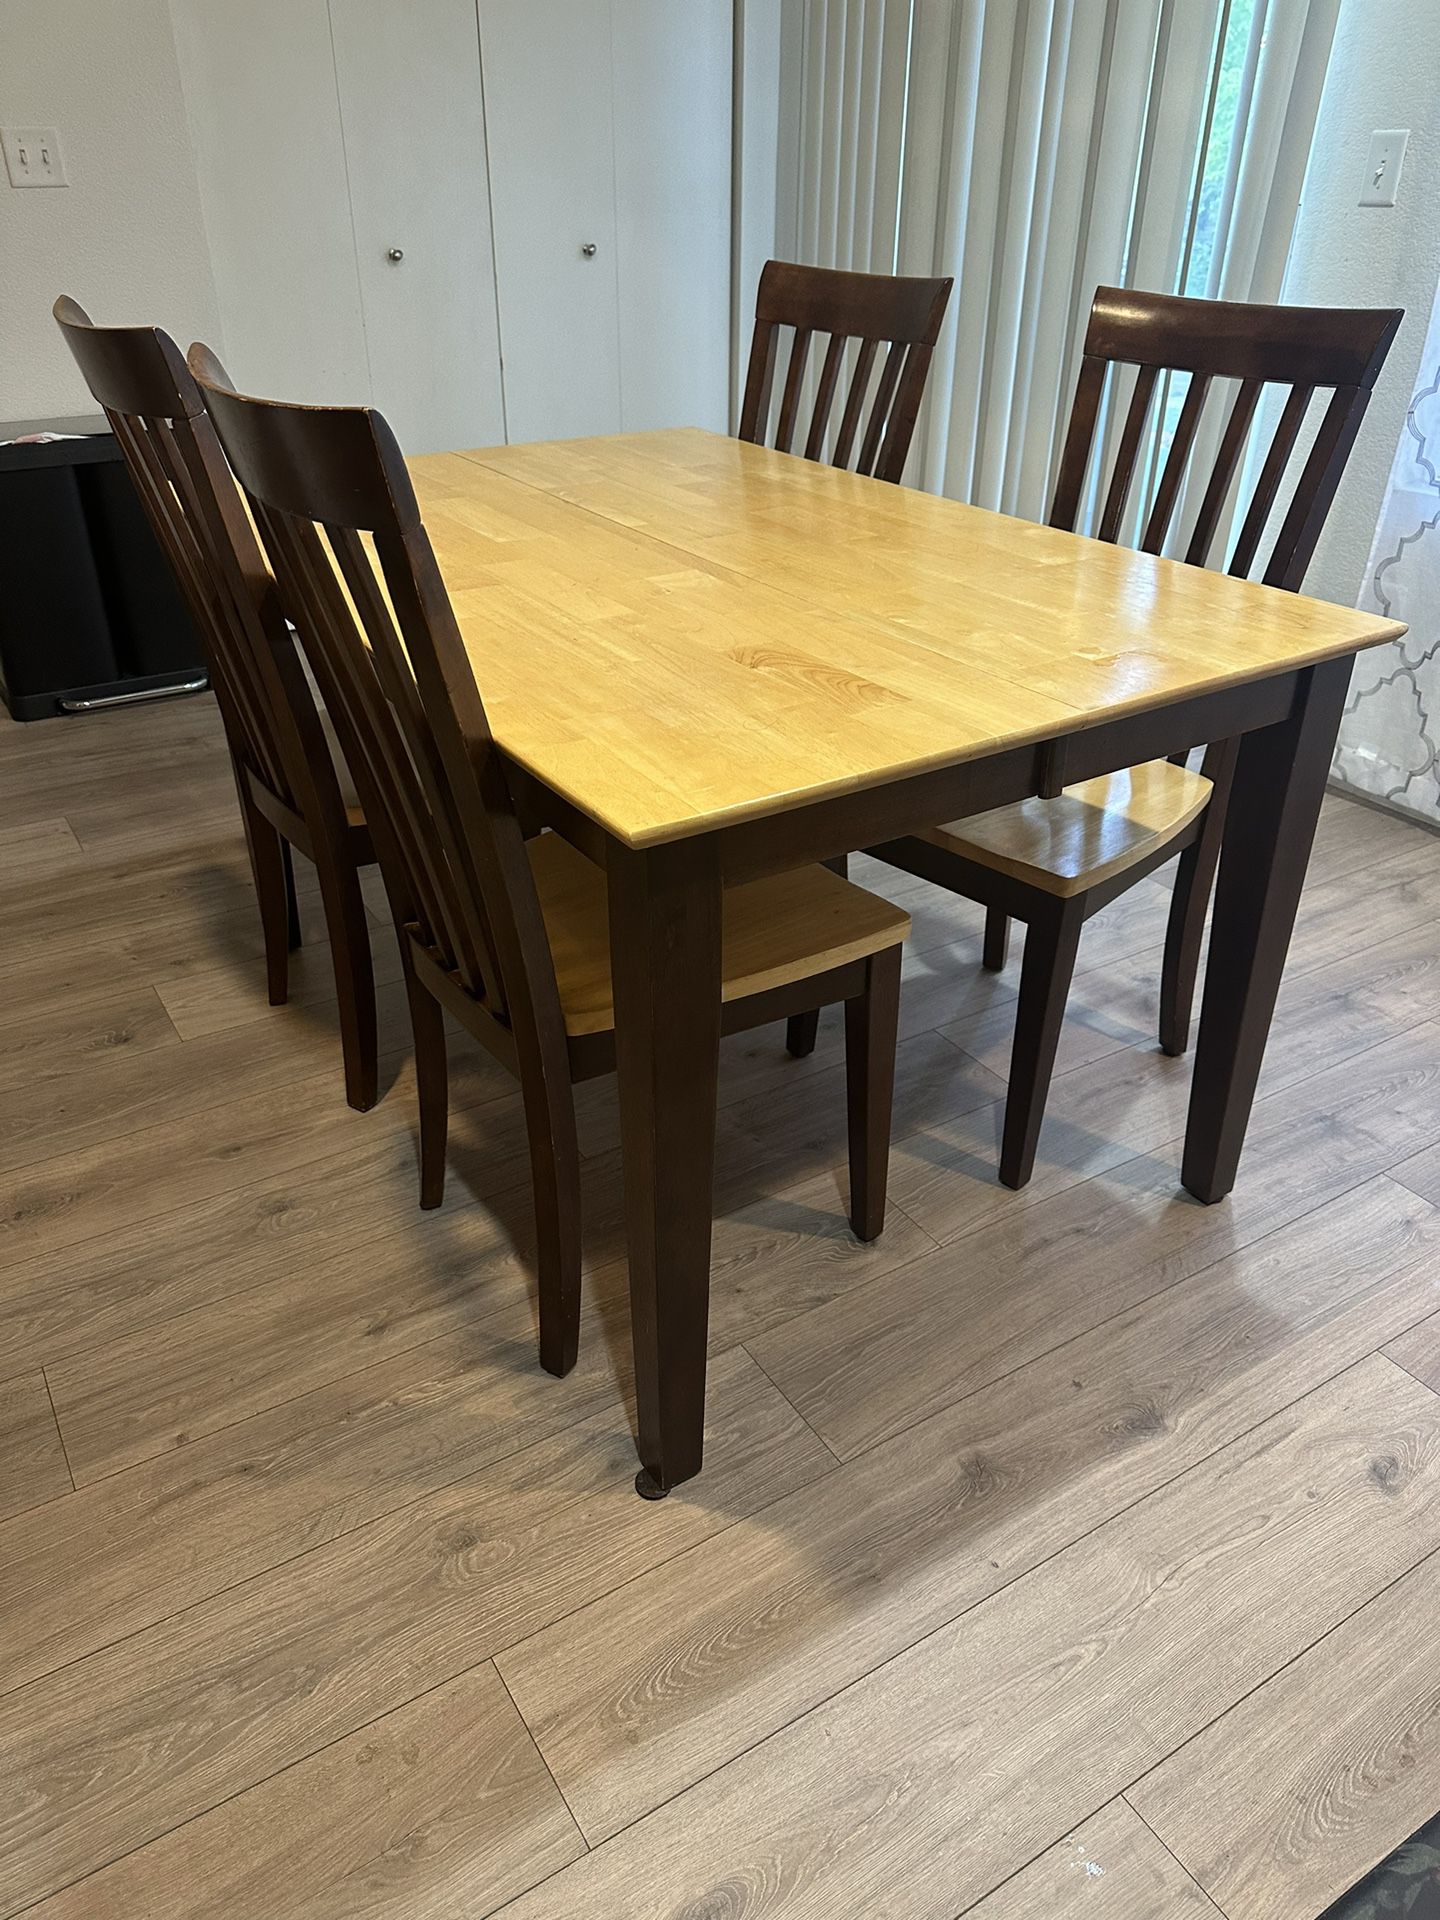 Kitchen Table chairs 